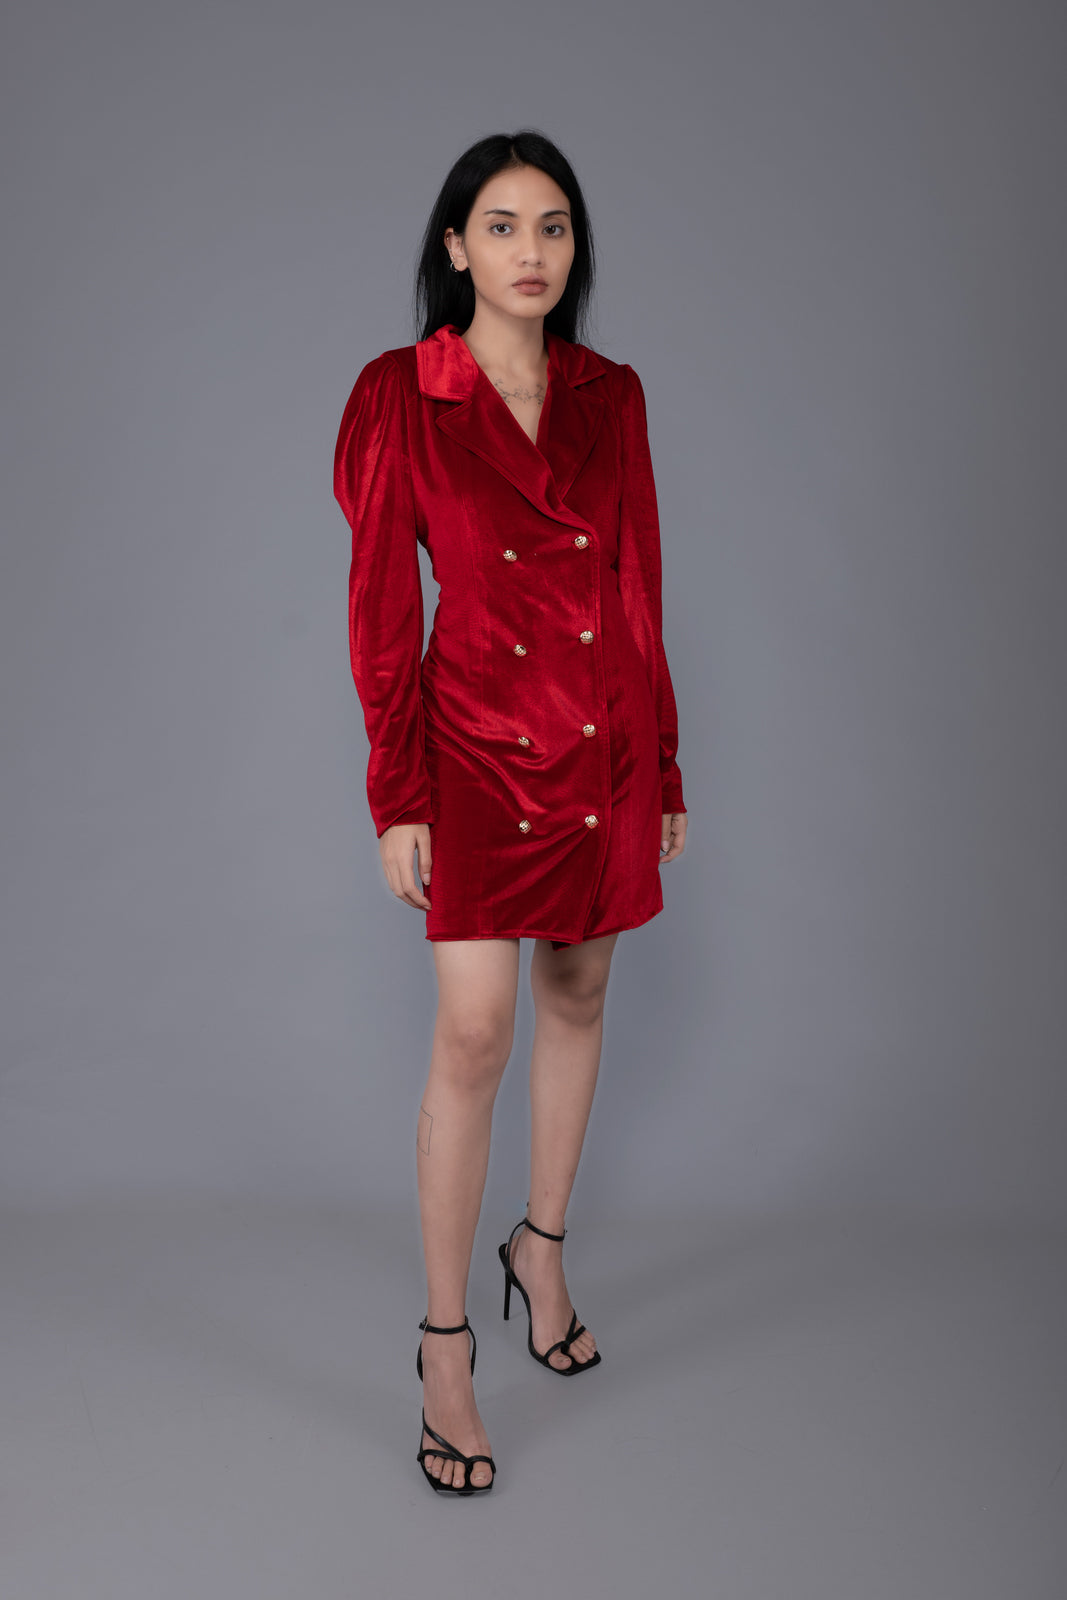 Royal Red Blazer Dress With Leg Of Mutton Full Sleeve, Enhancing Golden Buttons